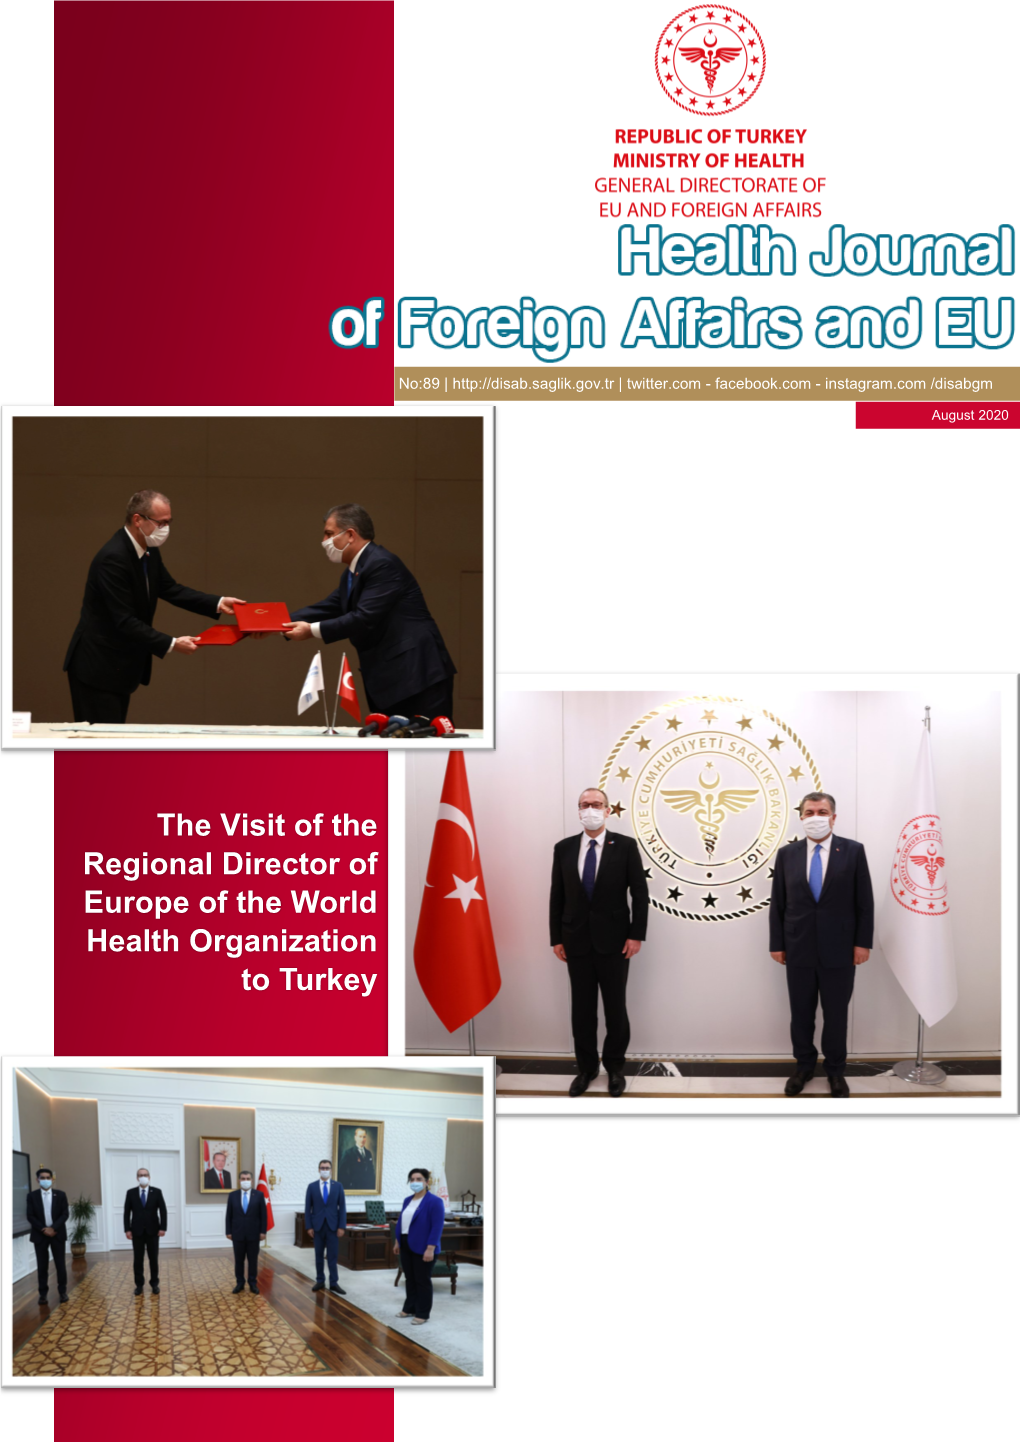 The Visit of the Regional Director of Europe of the World Health Organization to Turkey